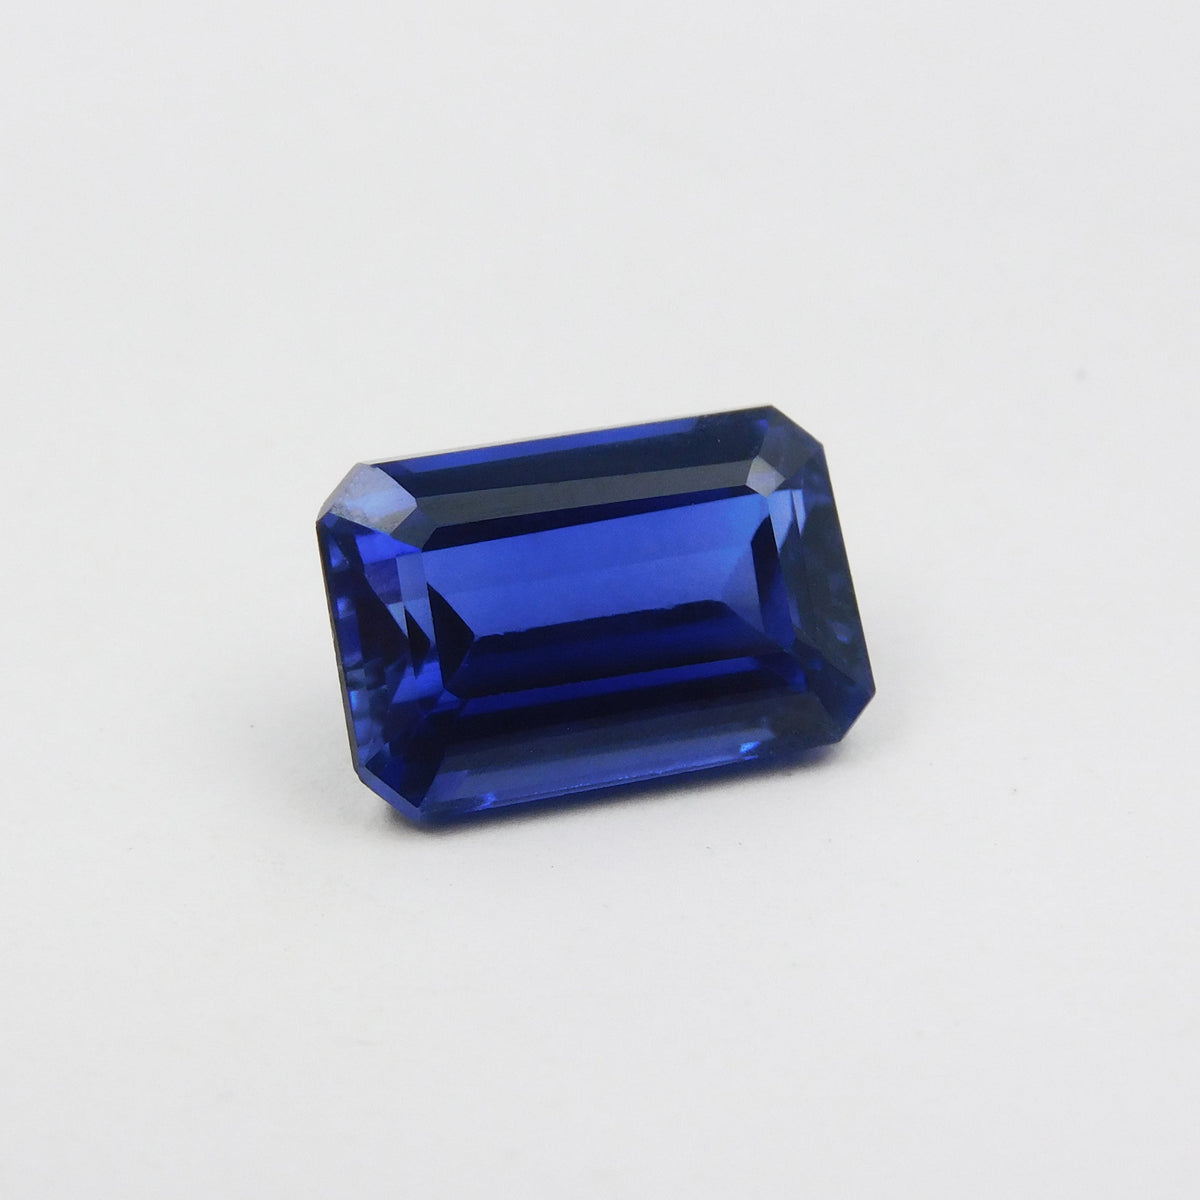 HAVE IT ON  BEST PRICE !!! Stunning Blue Tanzanite 11.45 Carat Blue Tanzanite Certified Natural Loose Gemstone | Free Delivery & Gift | Gift Your Loved Ones